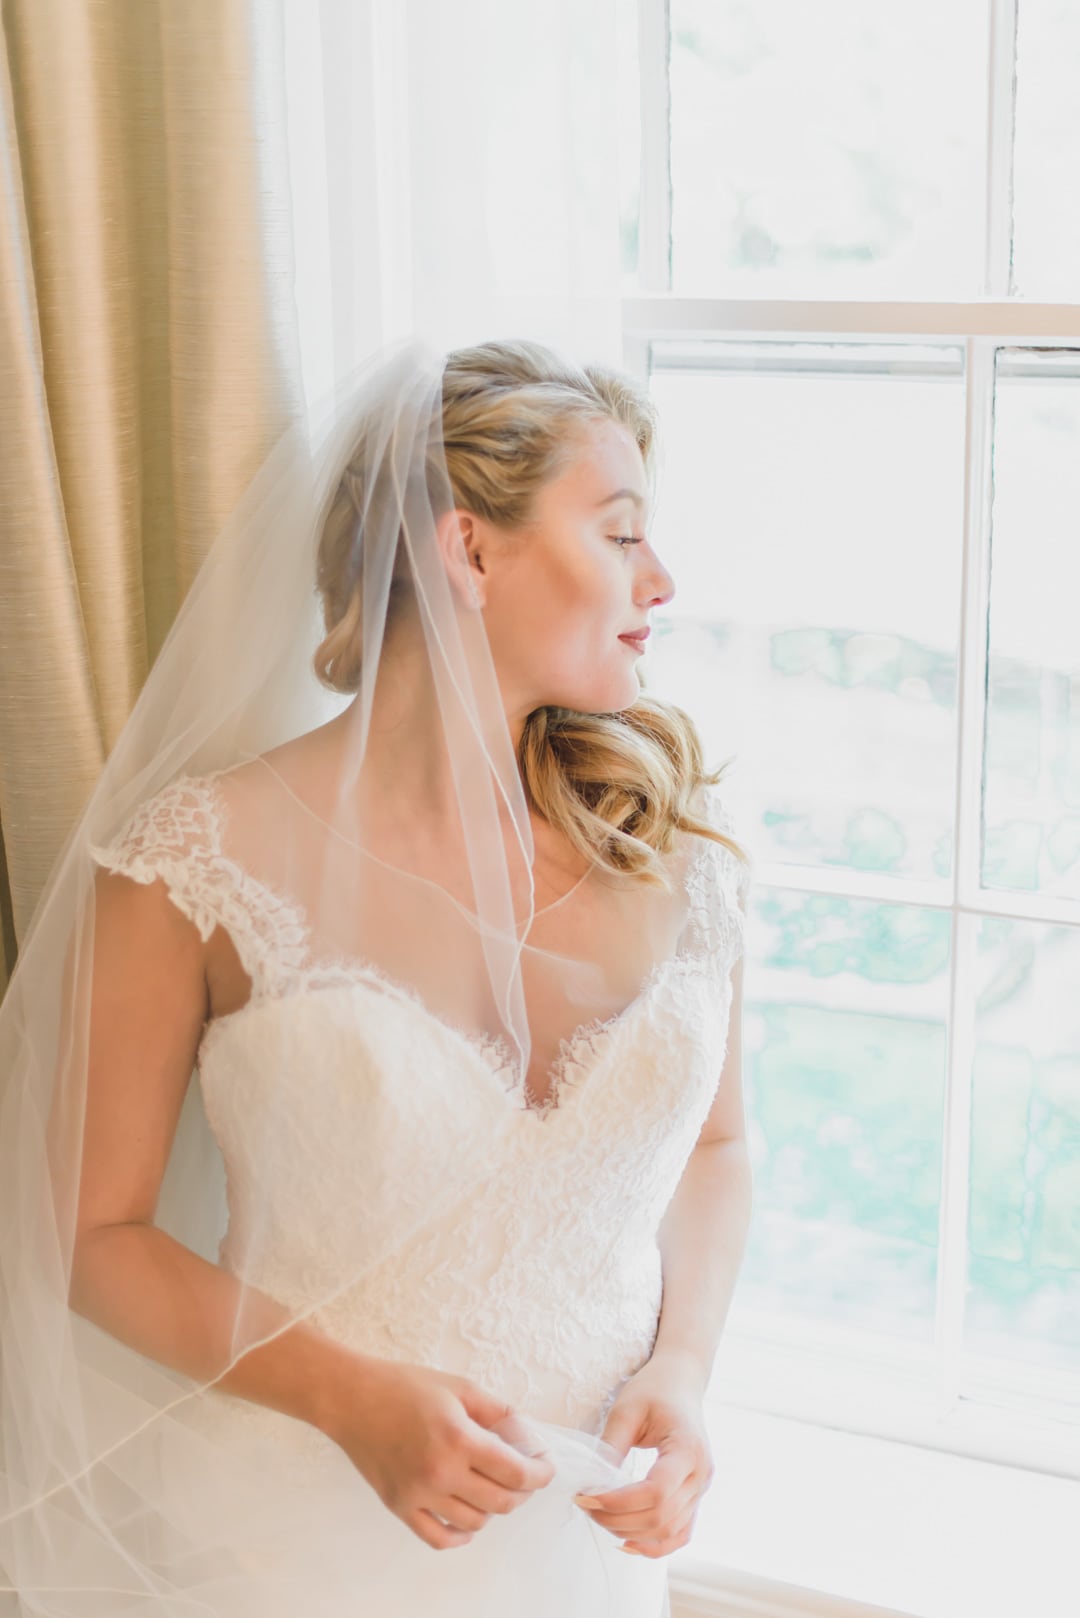 Bride looking elegant in her bridal dress as she looks out of the window in her suite at the 2101 Commonwealth in Boston